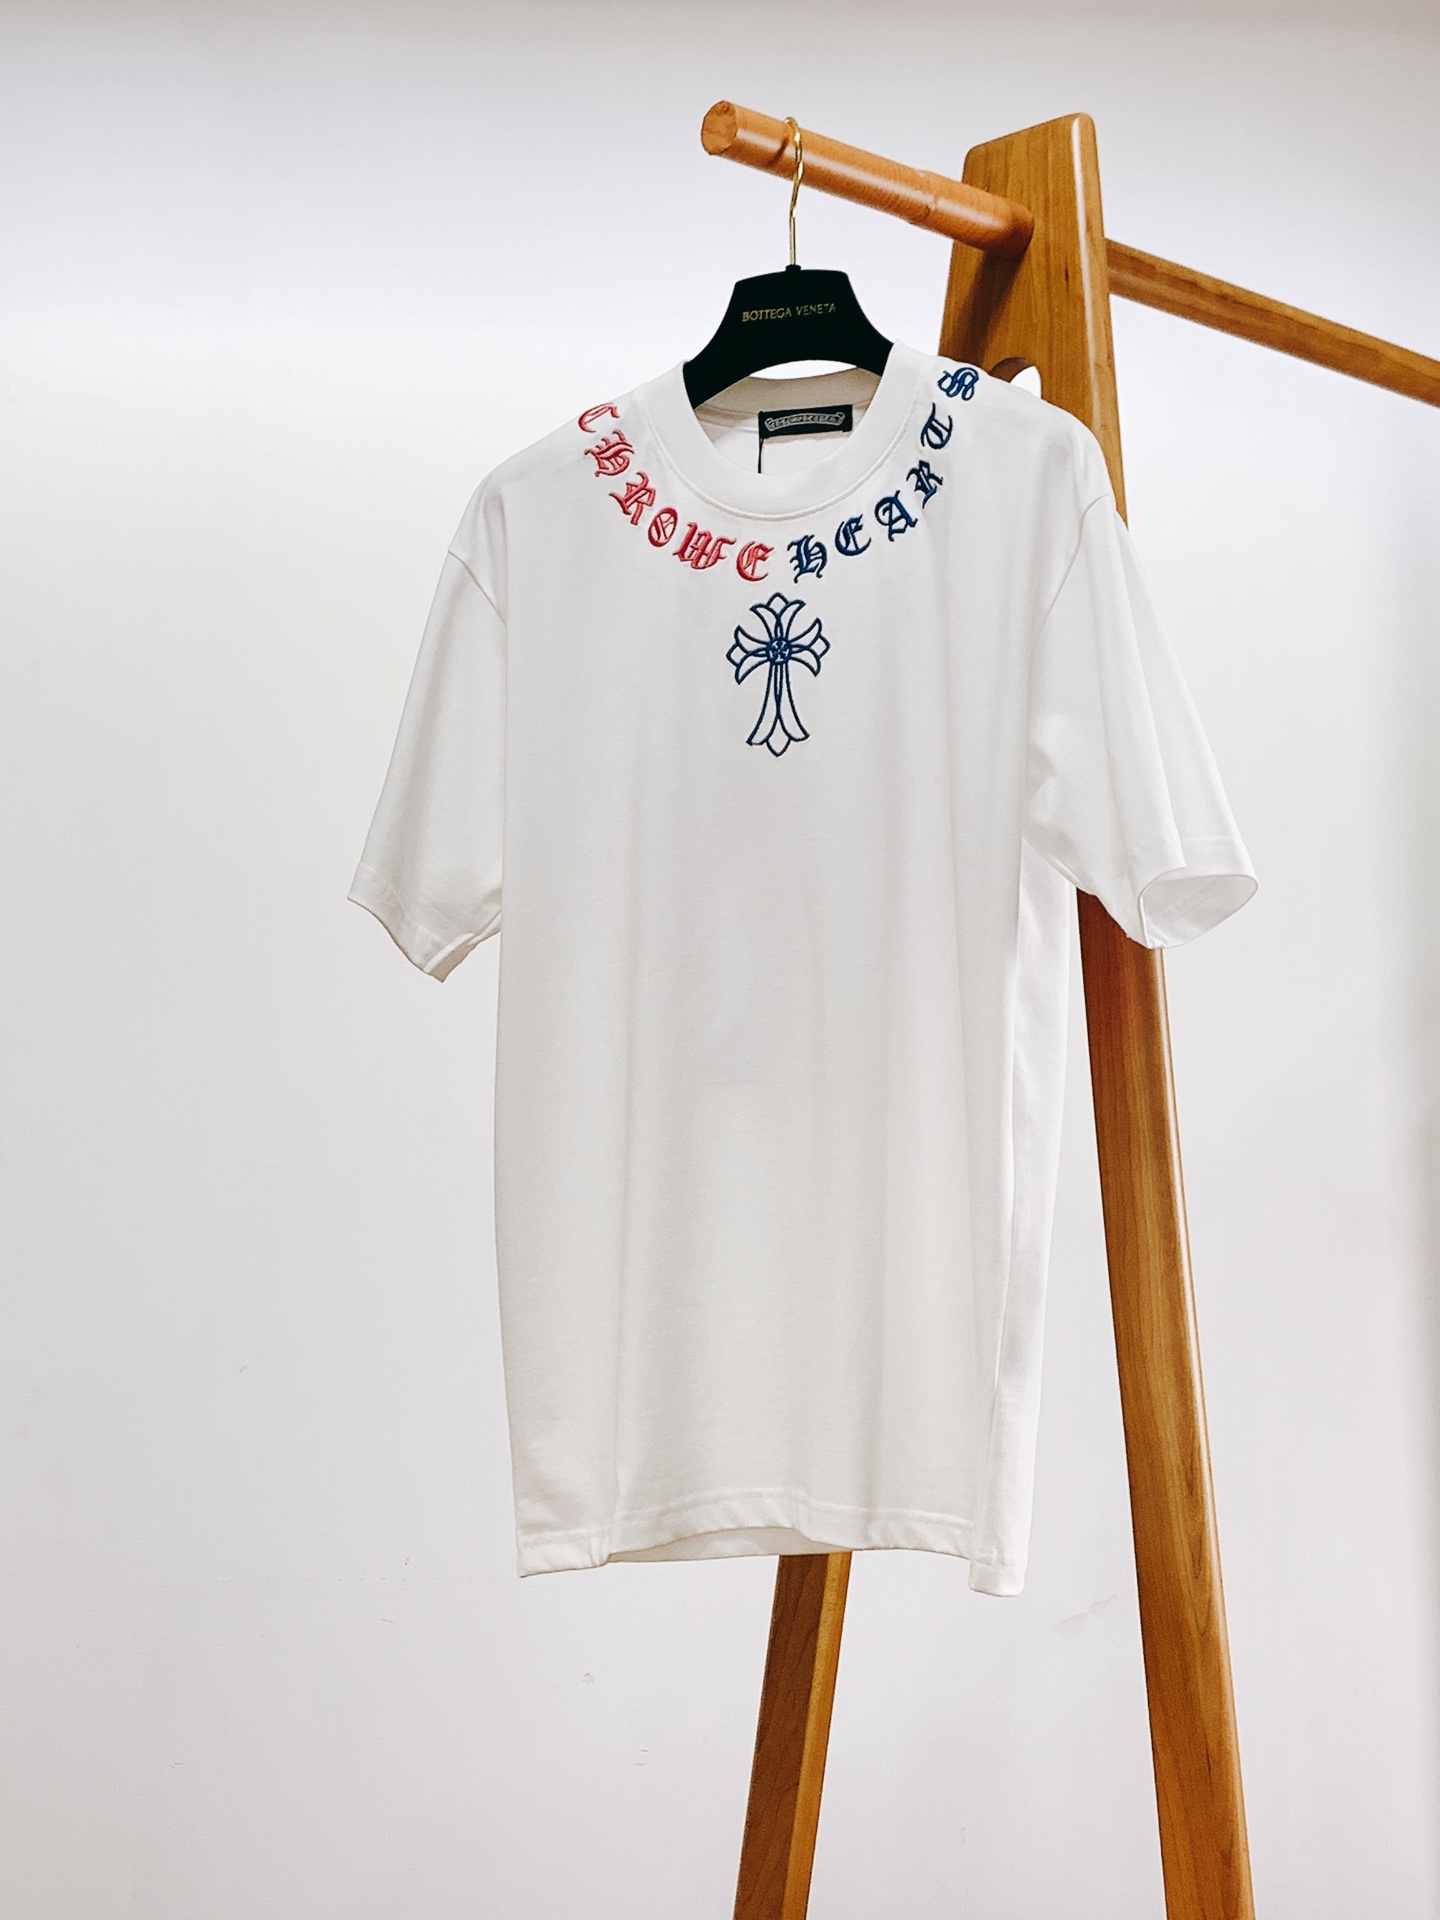 Top quality Fake
 Chrome Hearts Clothing T-Shirt Embroidery Unisex Cotton Spring/Summer Collection Fashion